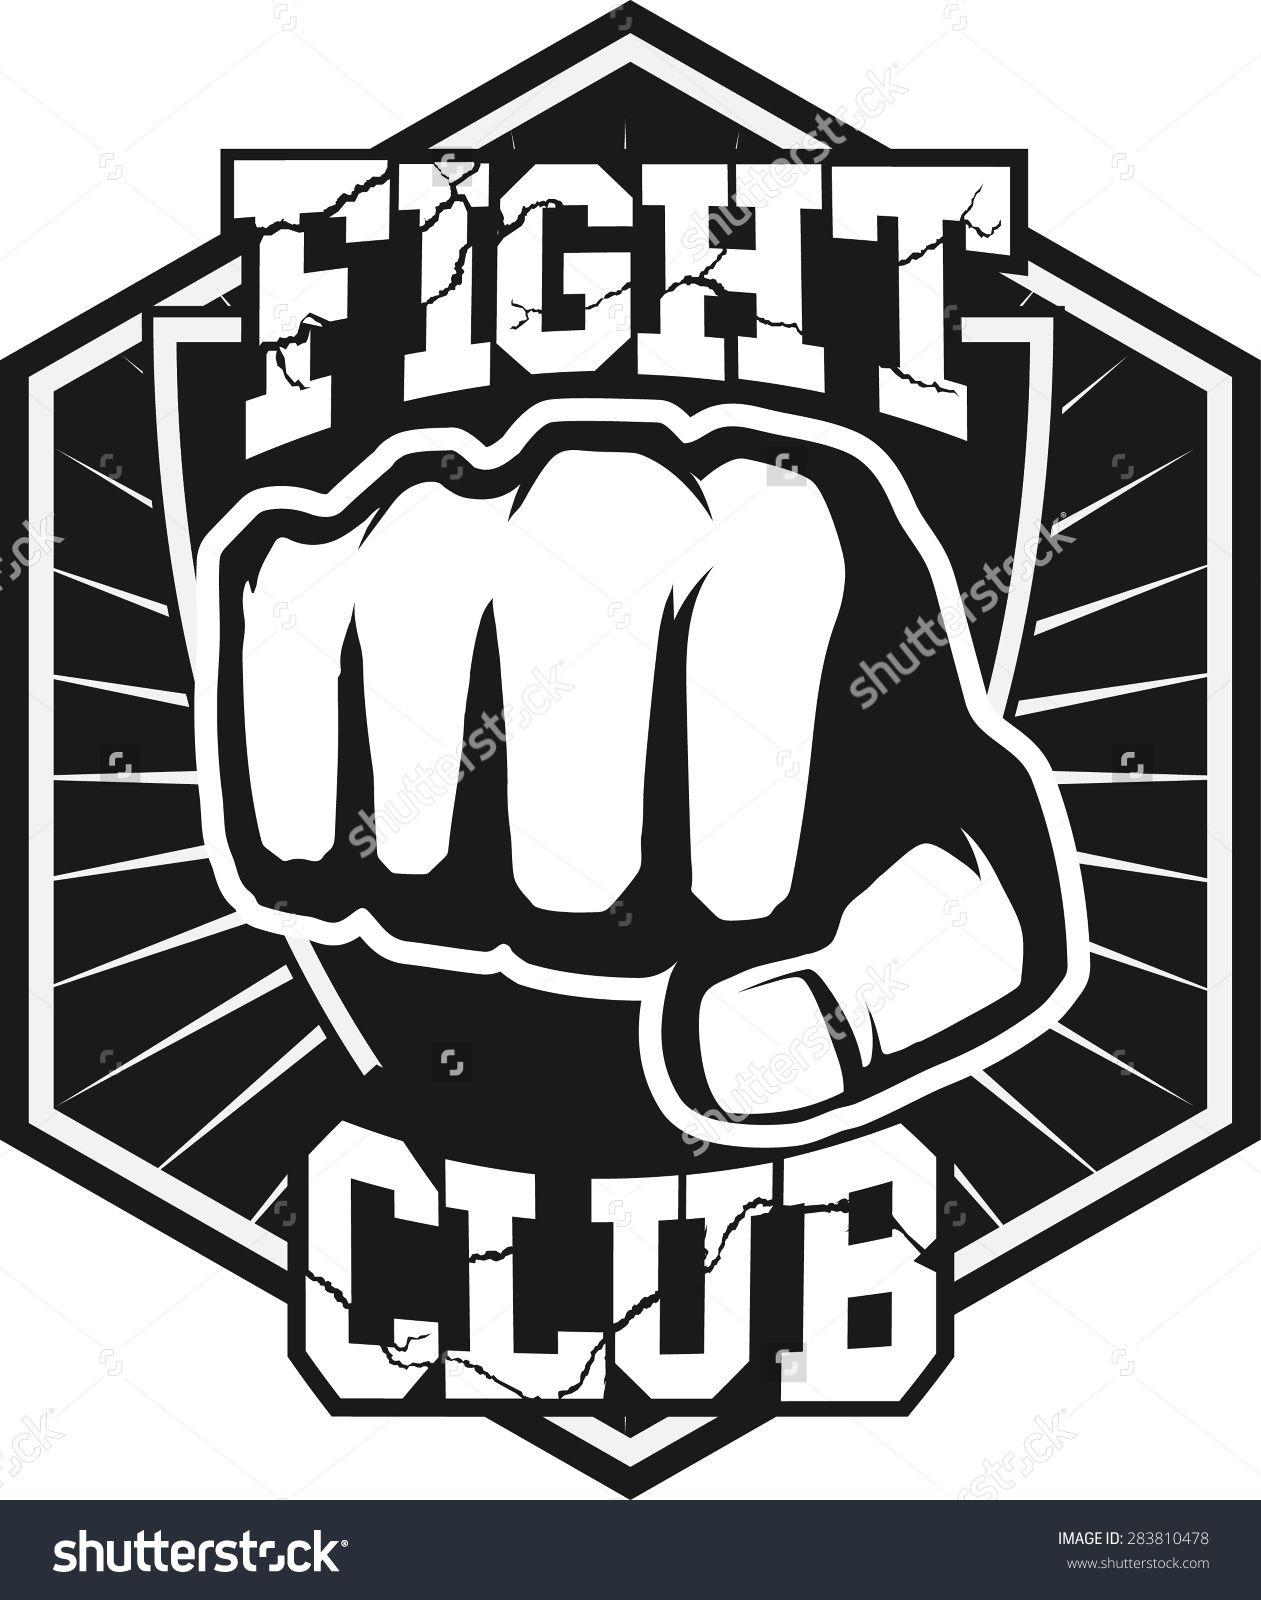 Fight Logo - Fight club MMA UFC Mixed martial arts fighting logo stamp ...